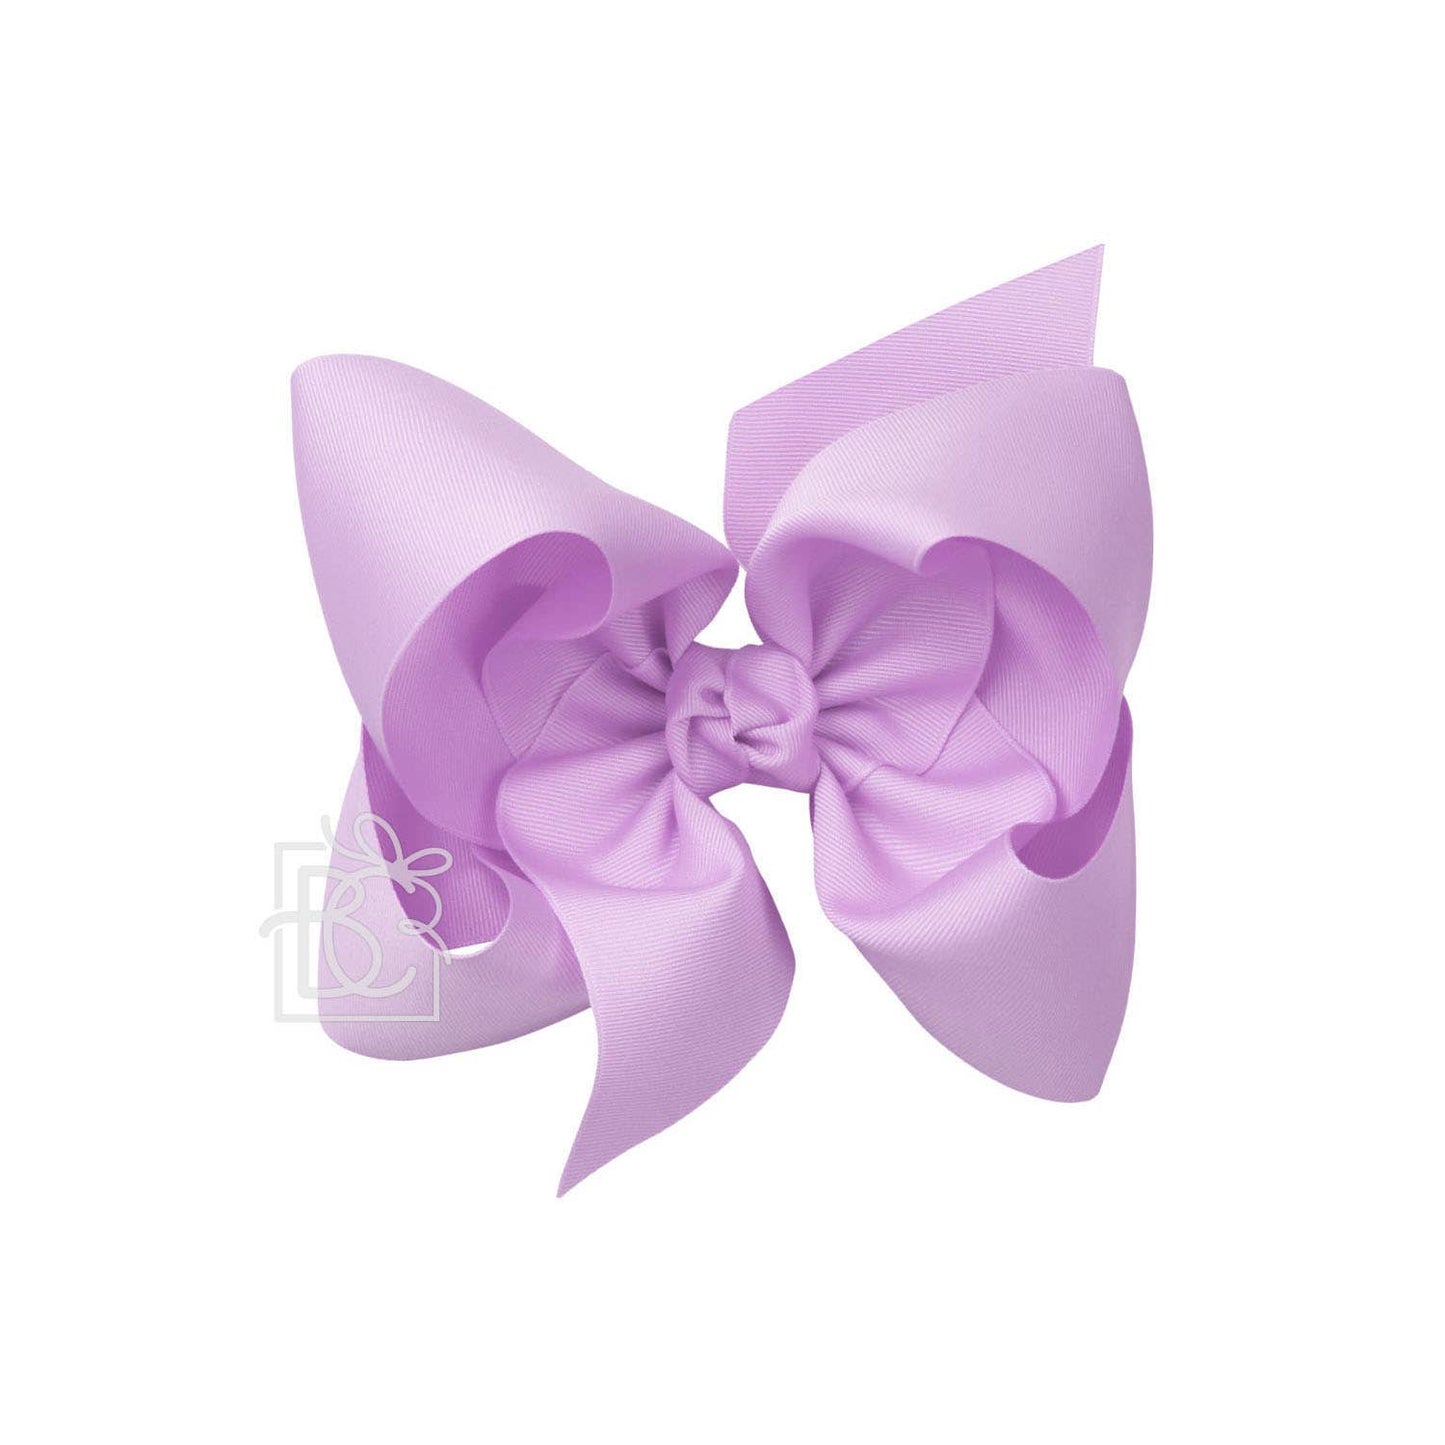 Texas Sized Bow in Light Orchid  - Doodlebug's Children's Boutique